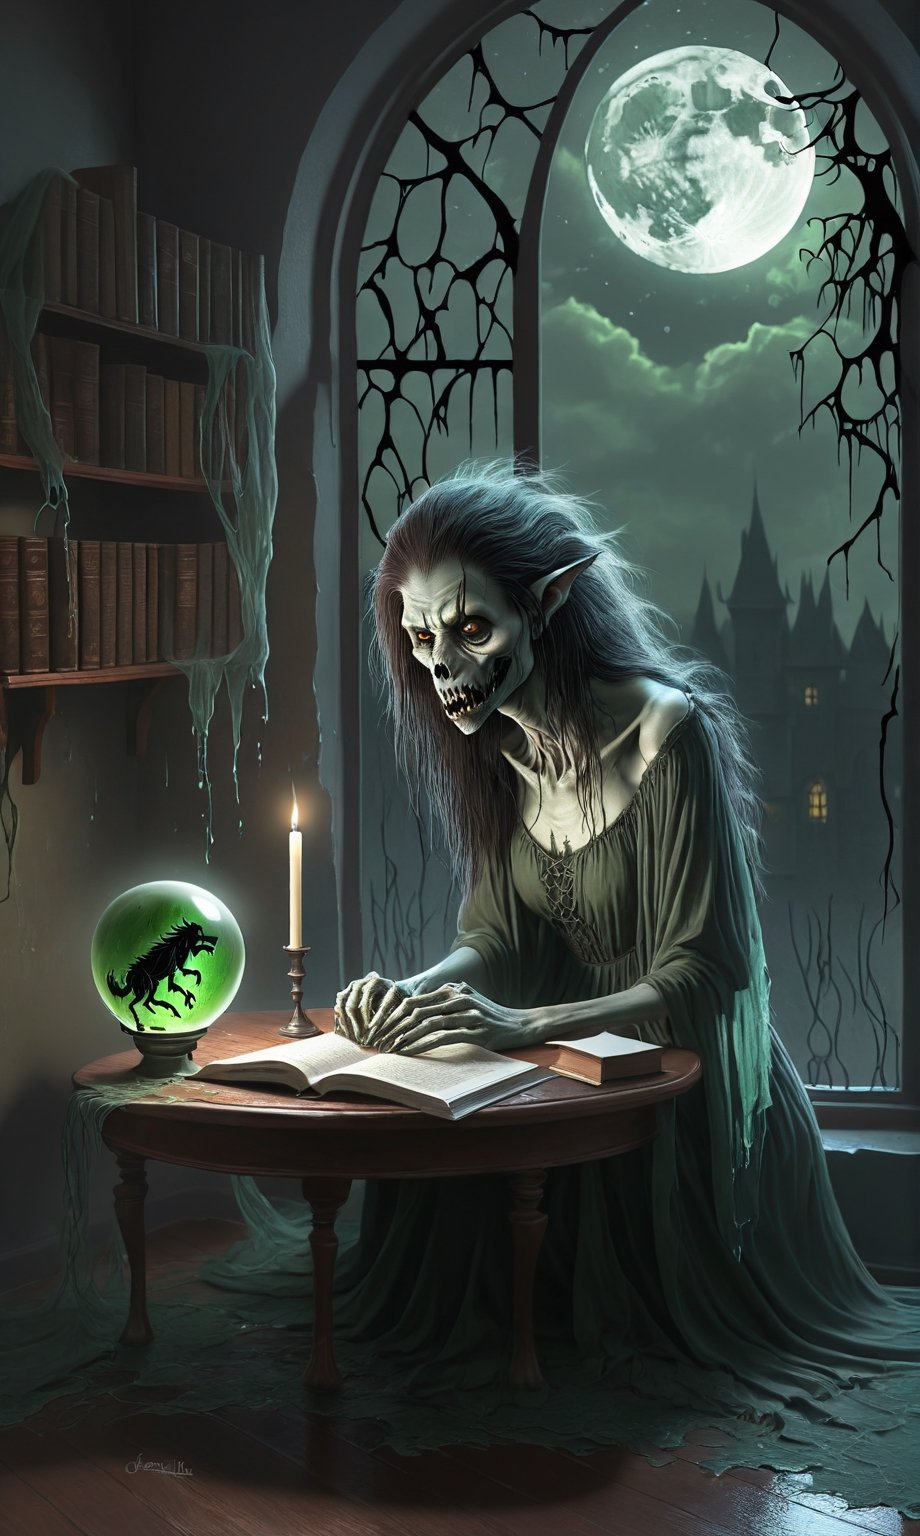 ((A thin wispy sad ghoul girl sitting at a desk)), she is studying book, (((an image of a goofy werewolf appears in the crystal ball sitting on the table))),1 tall drippy candle sits on the table,some green skeletal ghosts hover in the background, a thin crescent moon shines through a broken window,(spiderwebs),donmcr33pyn1ghtm4r3xl  